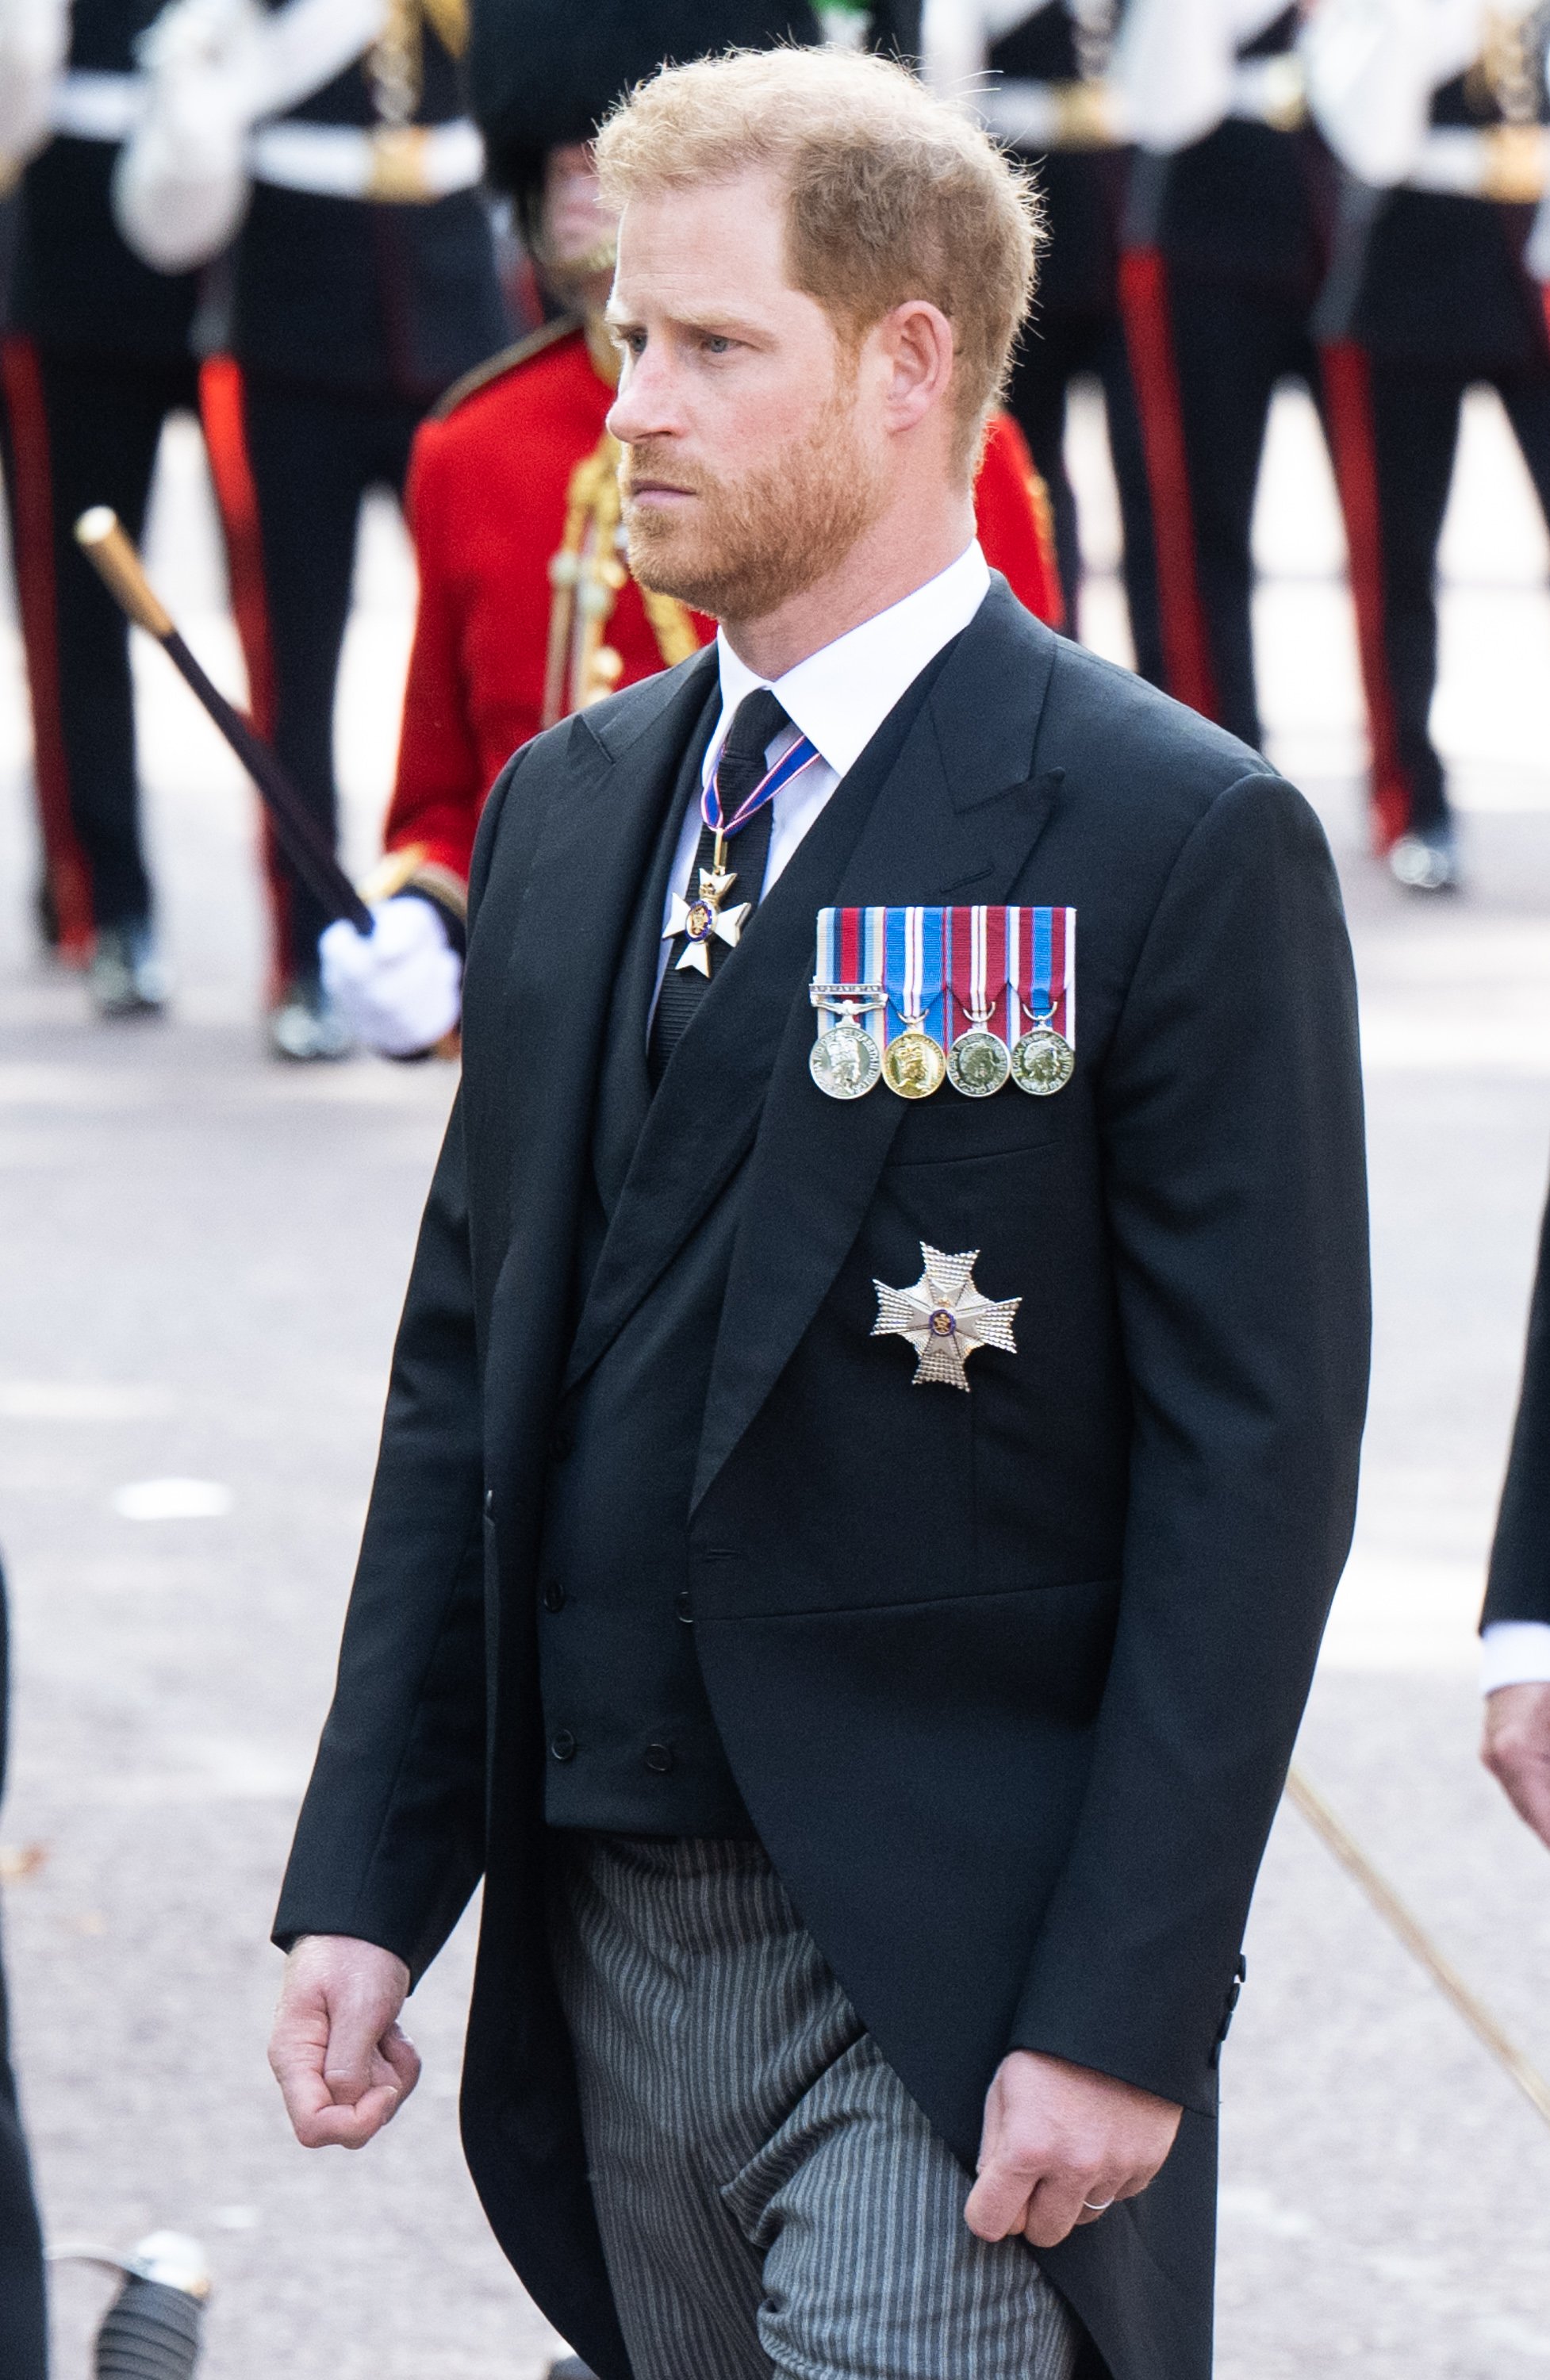 Prince Harry at the Queen procession in London 2022. | Source: Getty Images